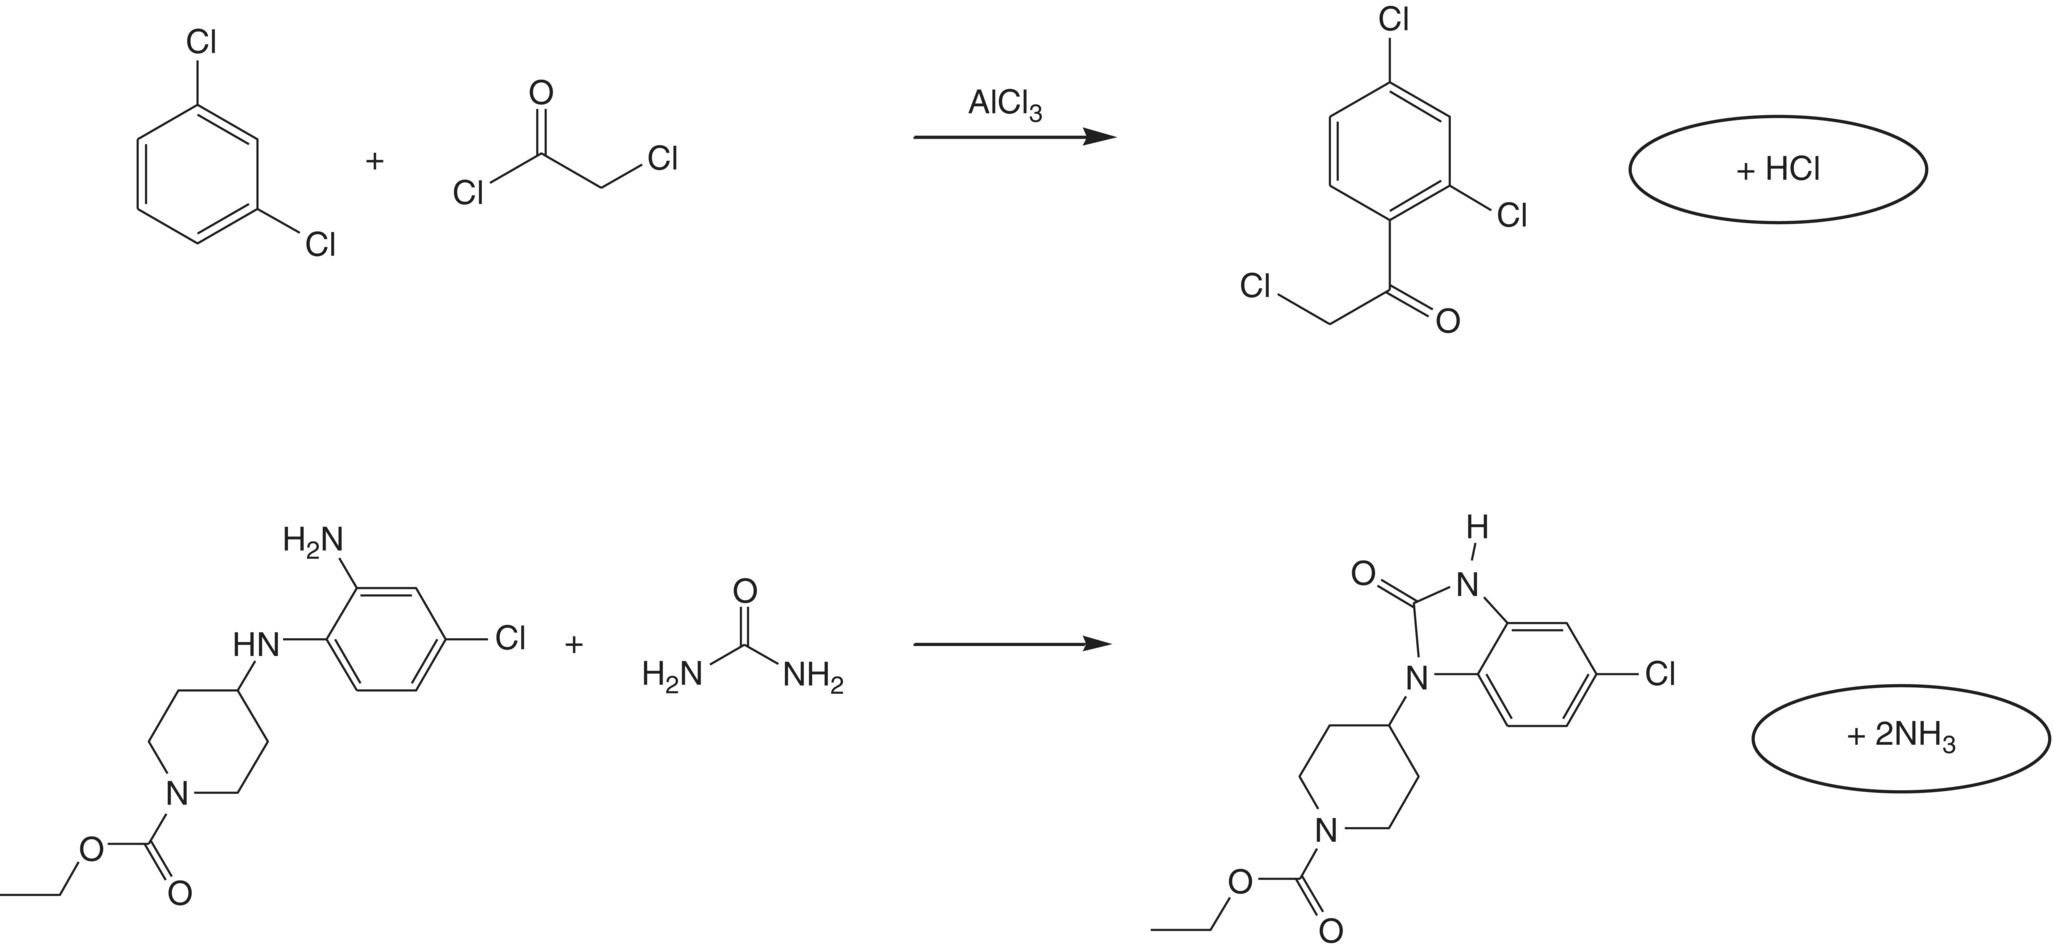 Two synthetic reactions generating reactive gasses: + HCl (top) and + 2NH3 (bottom).